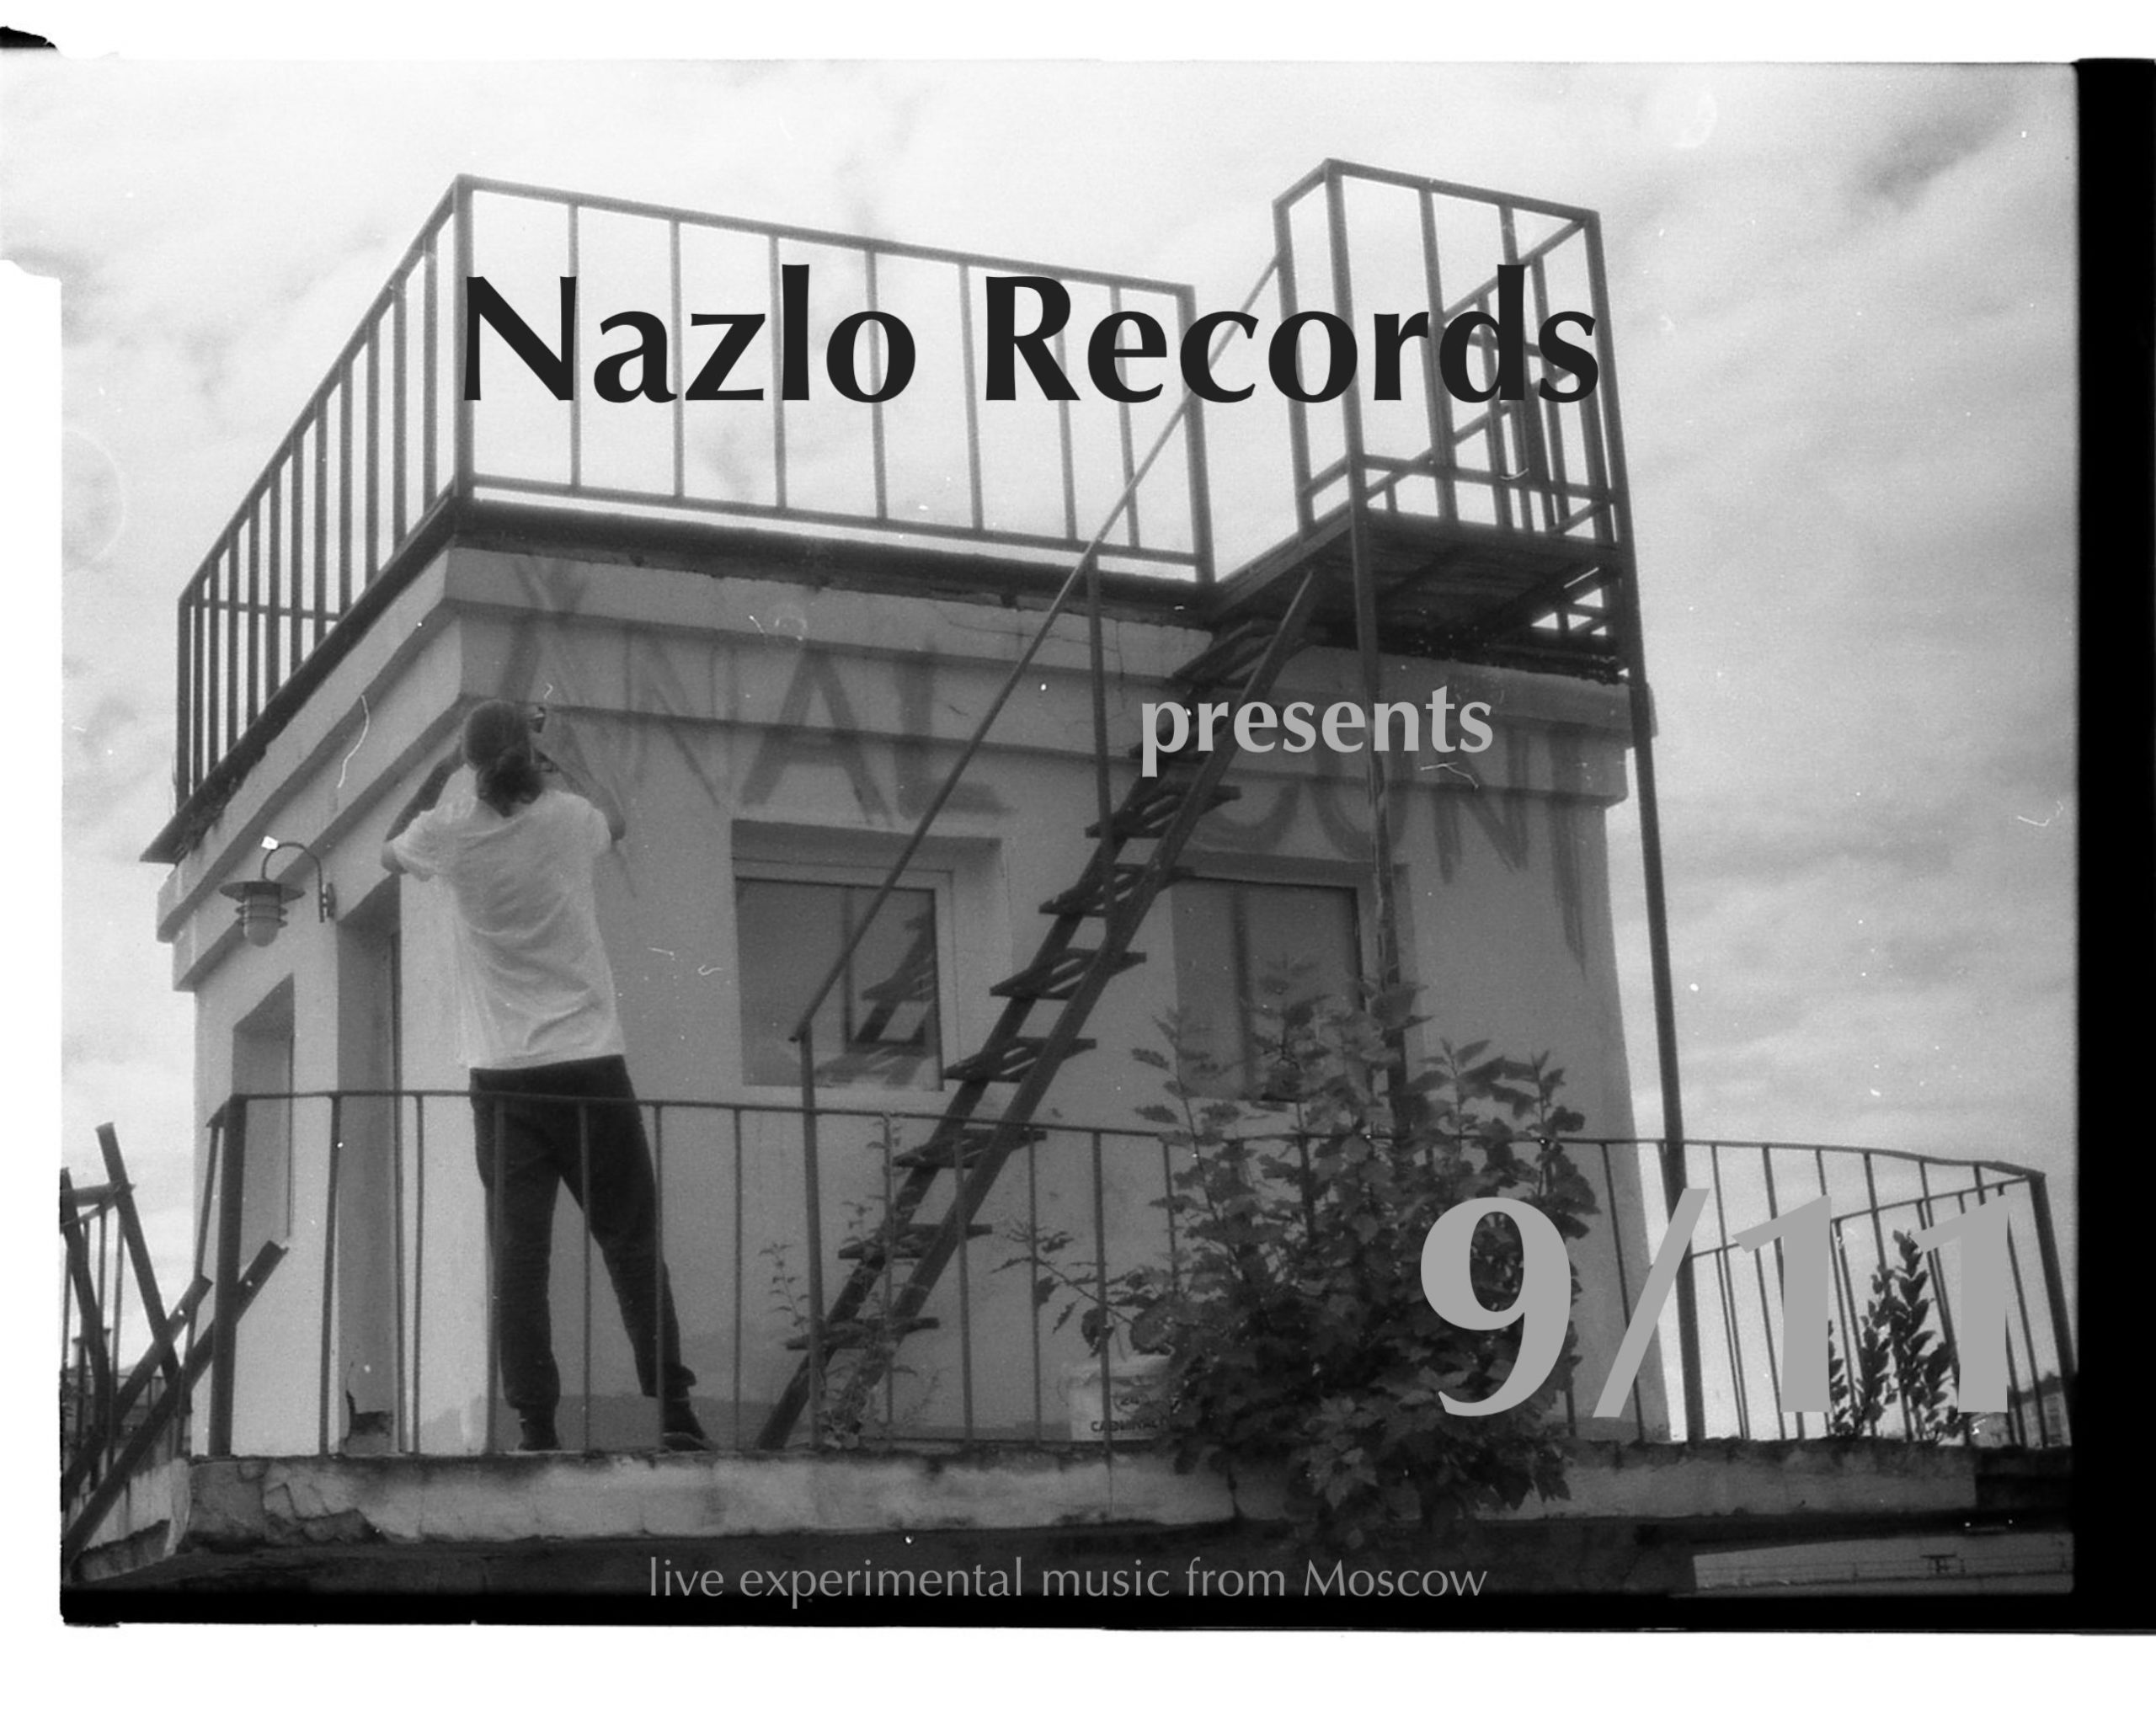 Nazlo Records presents 9/11 – live experimental music from Moscow